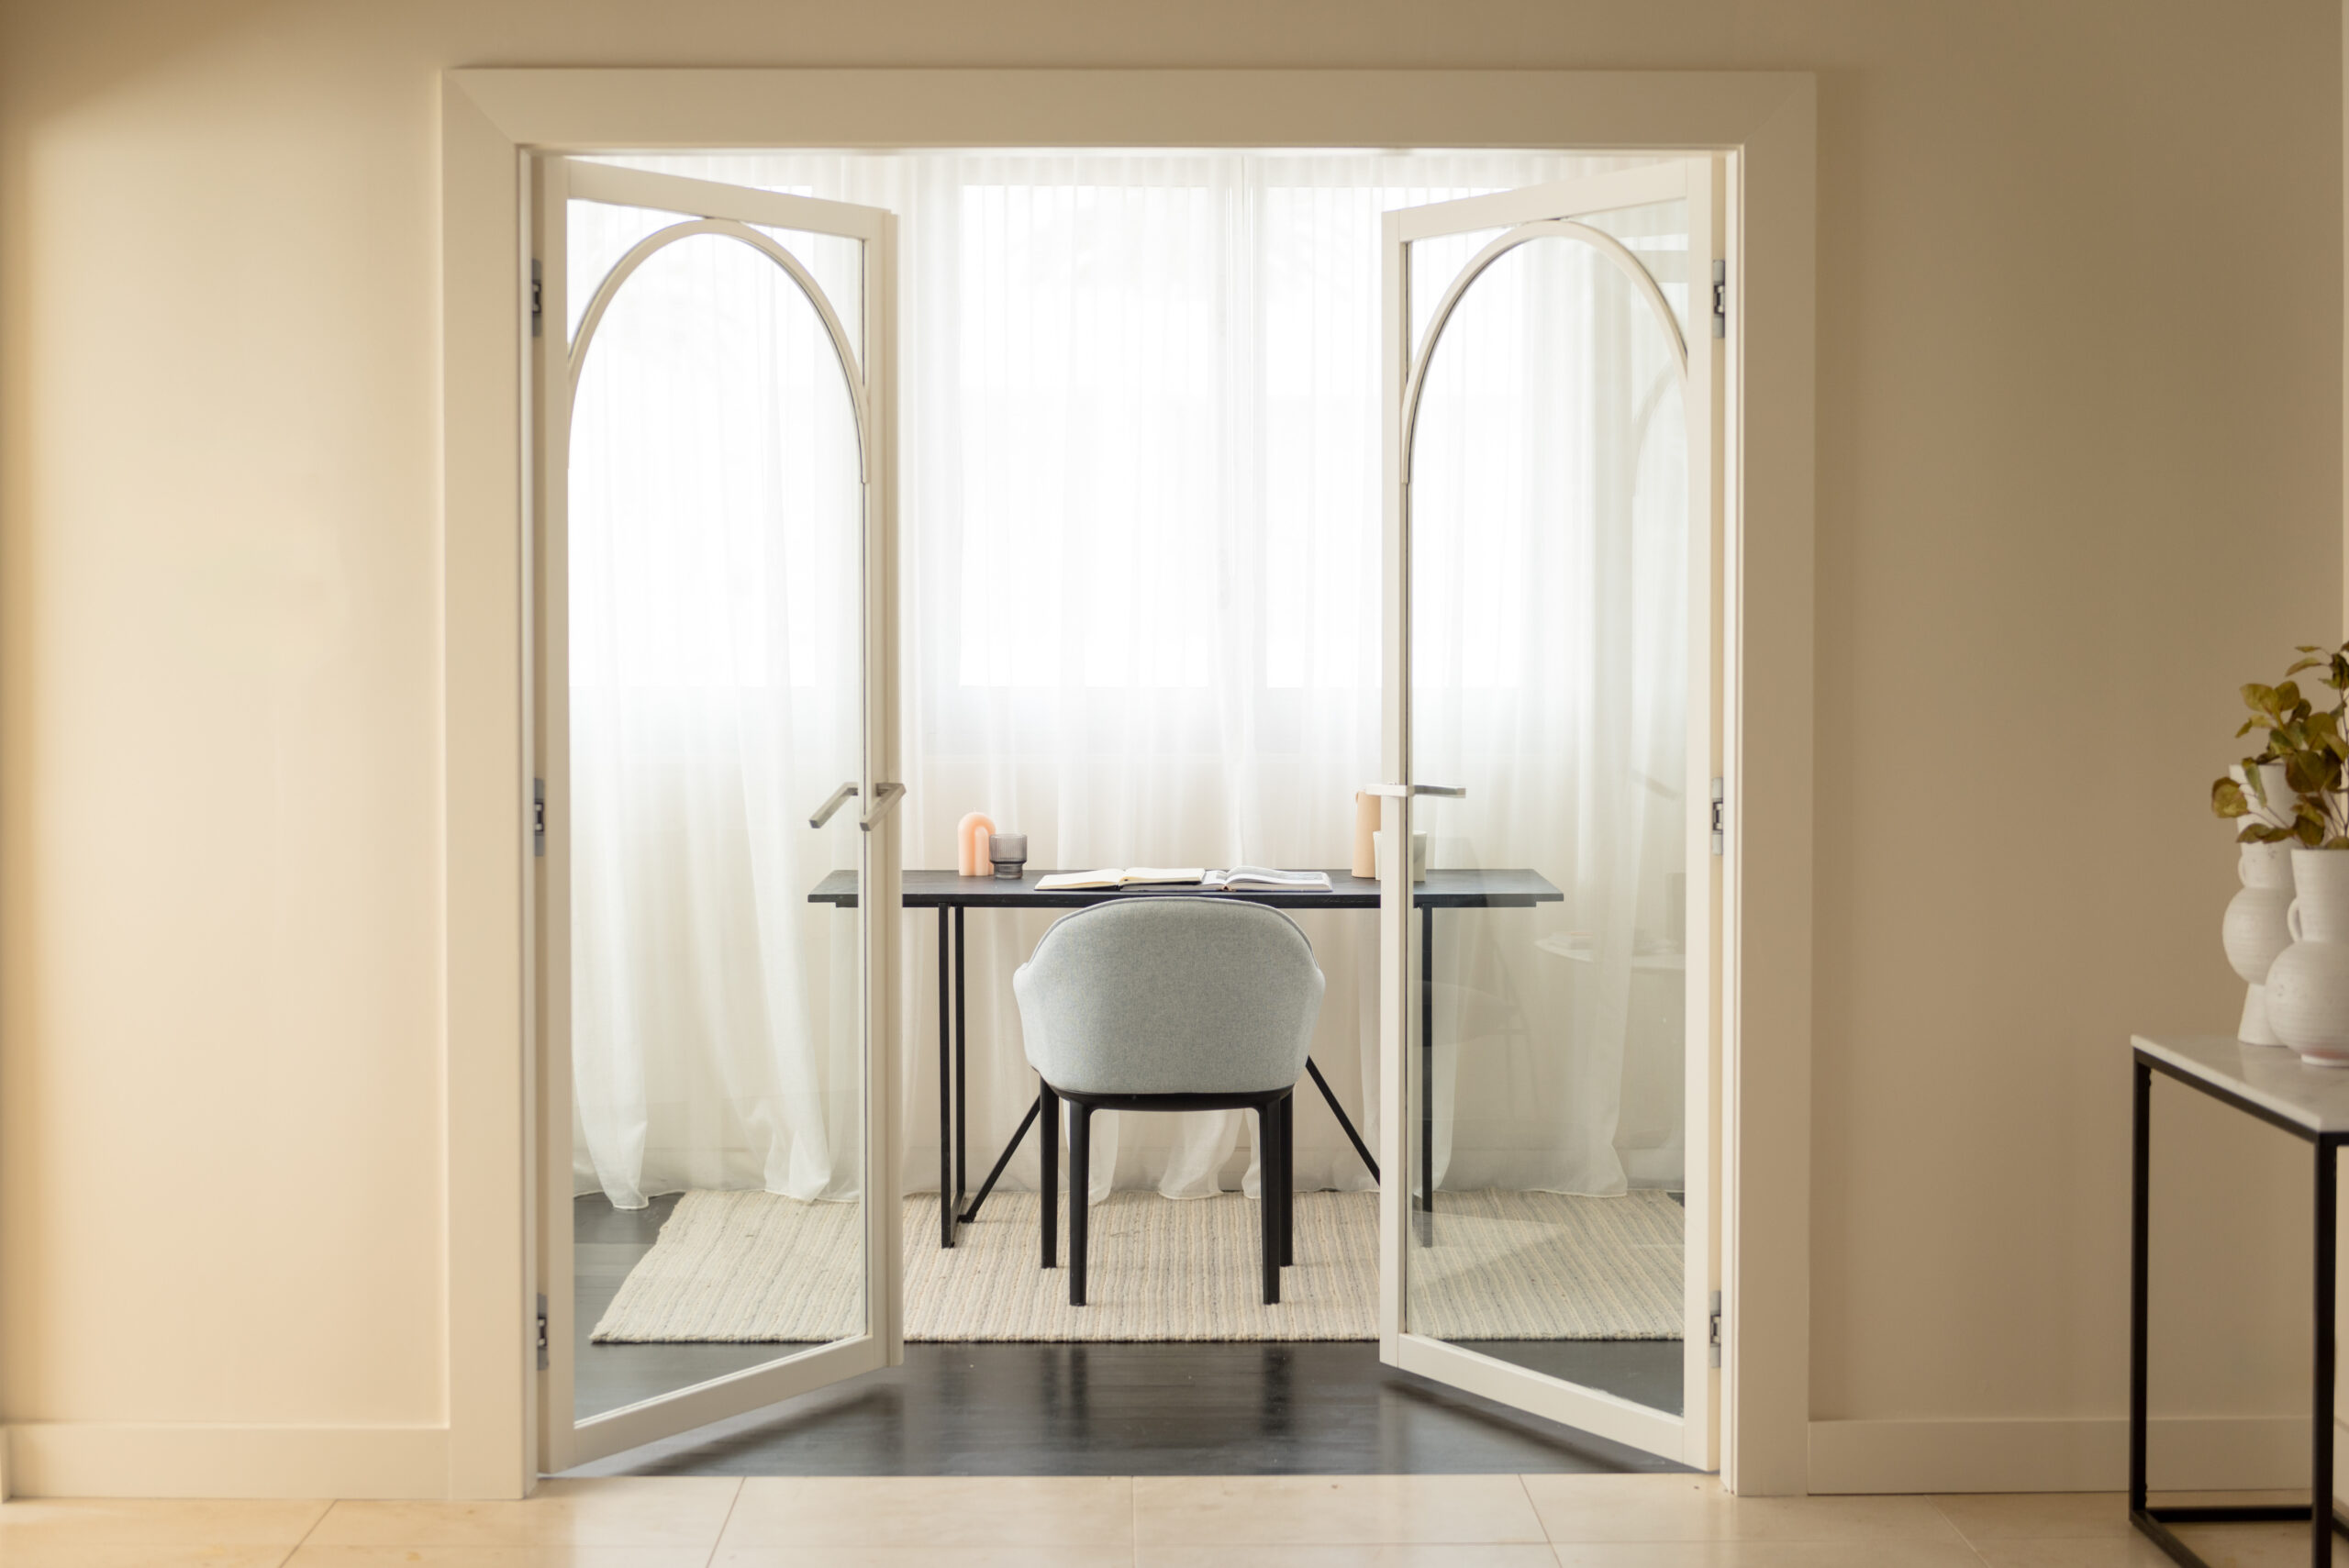 Photo of white double glass doors partially open to the study with a desk, chair and window sheers in the room